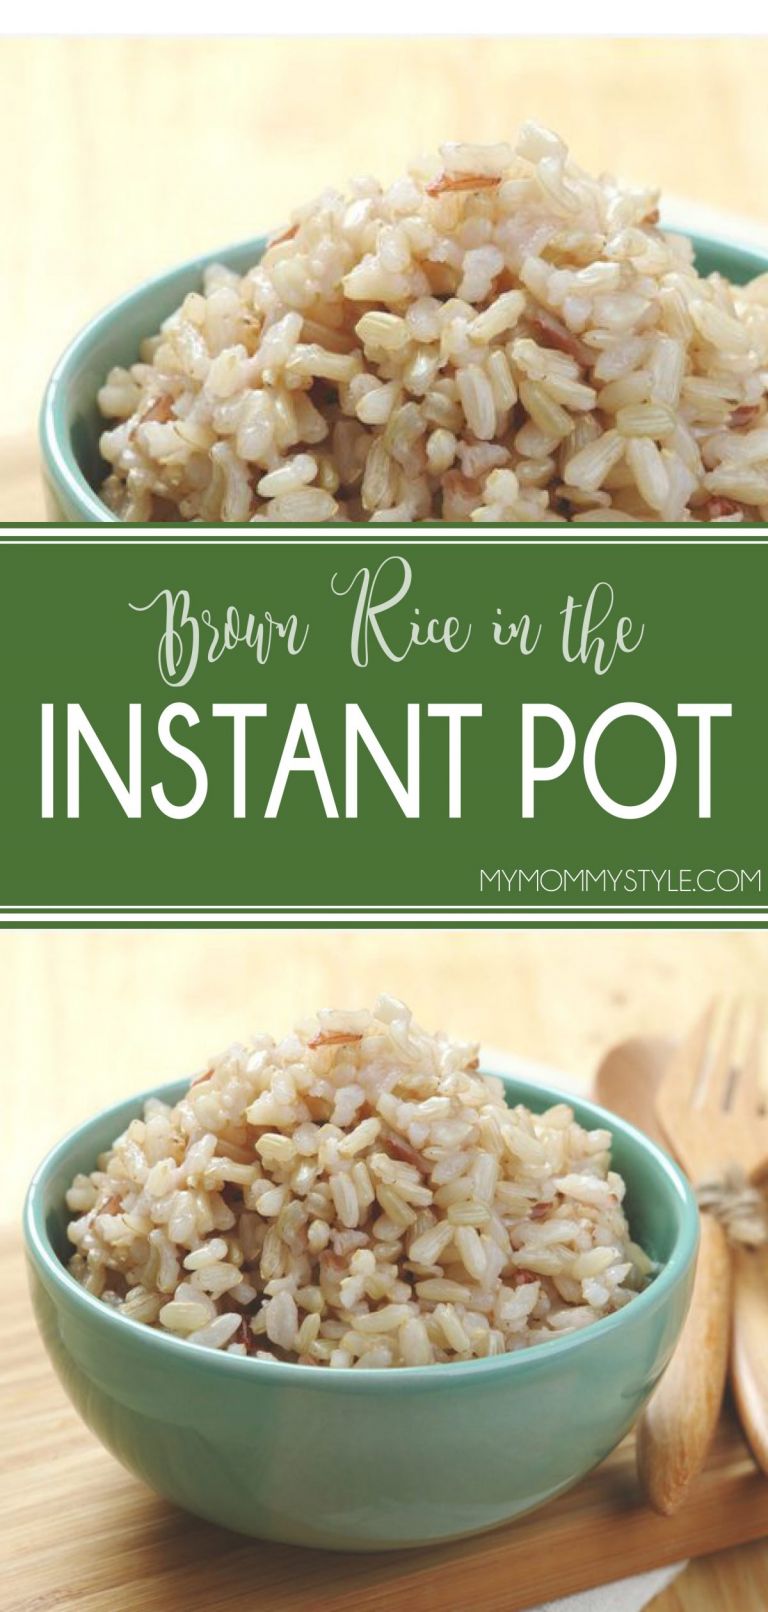 Brown rice in the Instant Pot